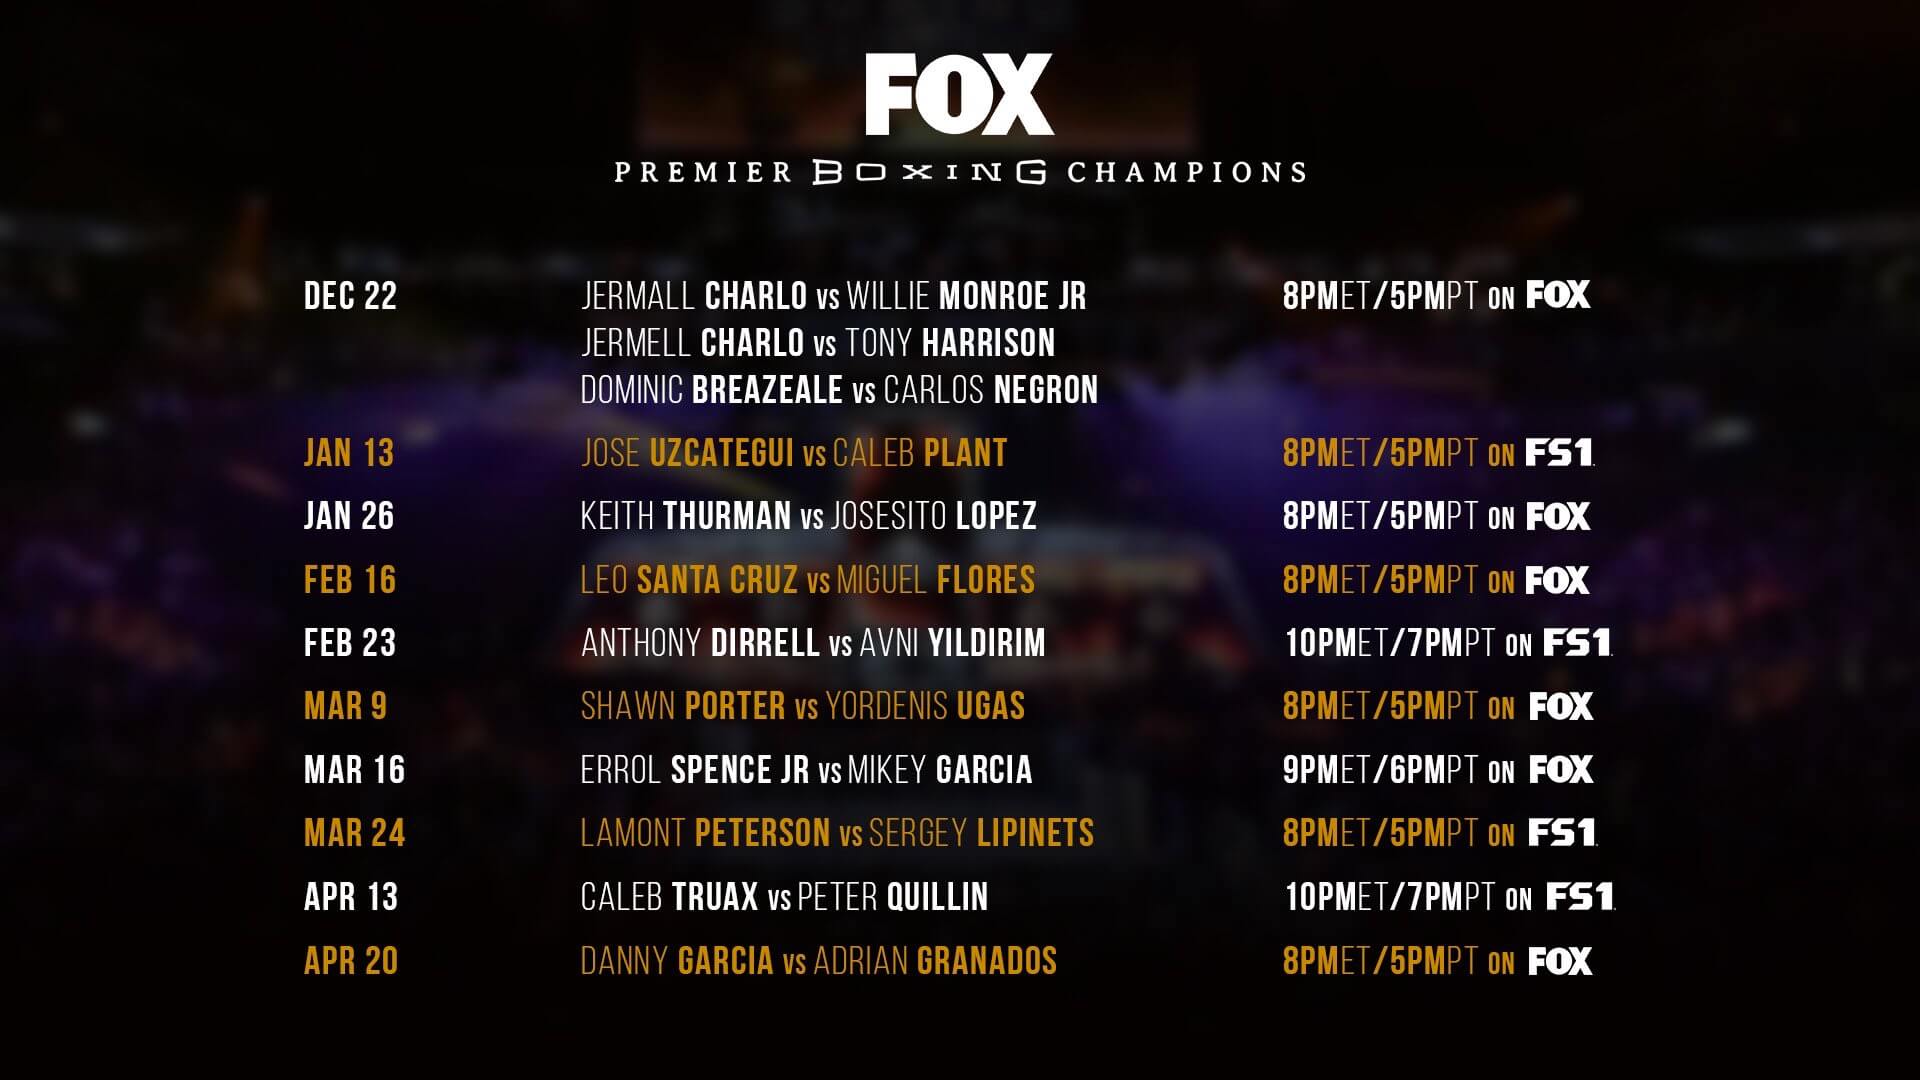 PBC Fox Schedule set, Errol Spence vs. Mikey Garcia on PPV stands out